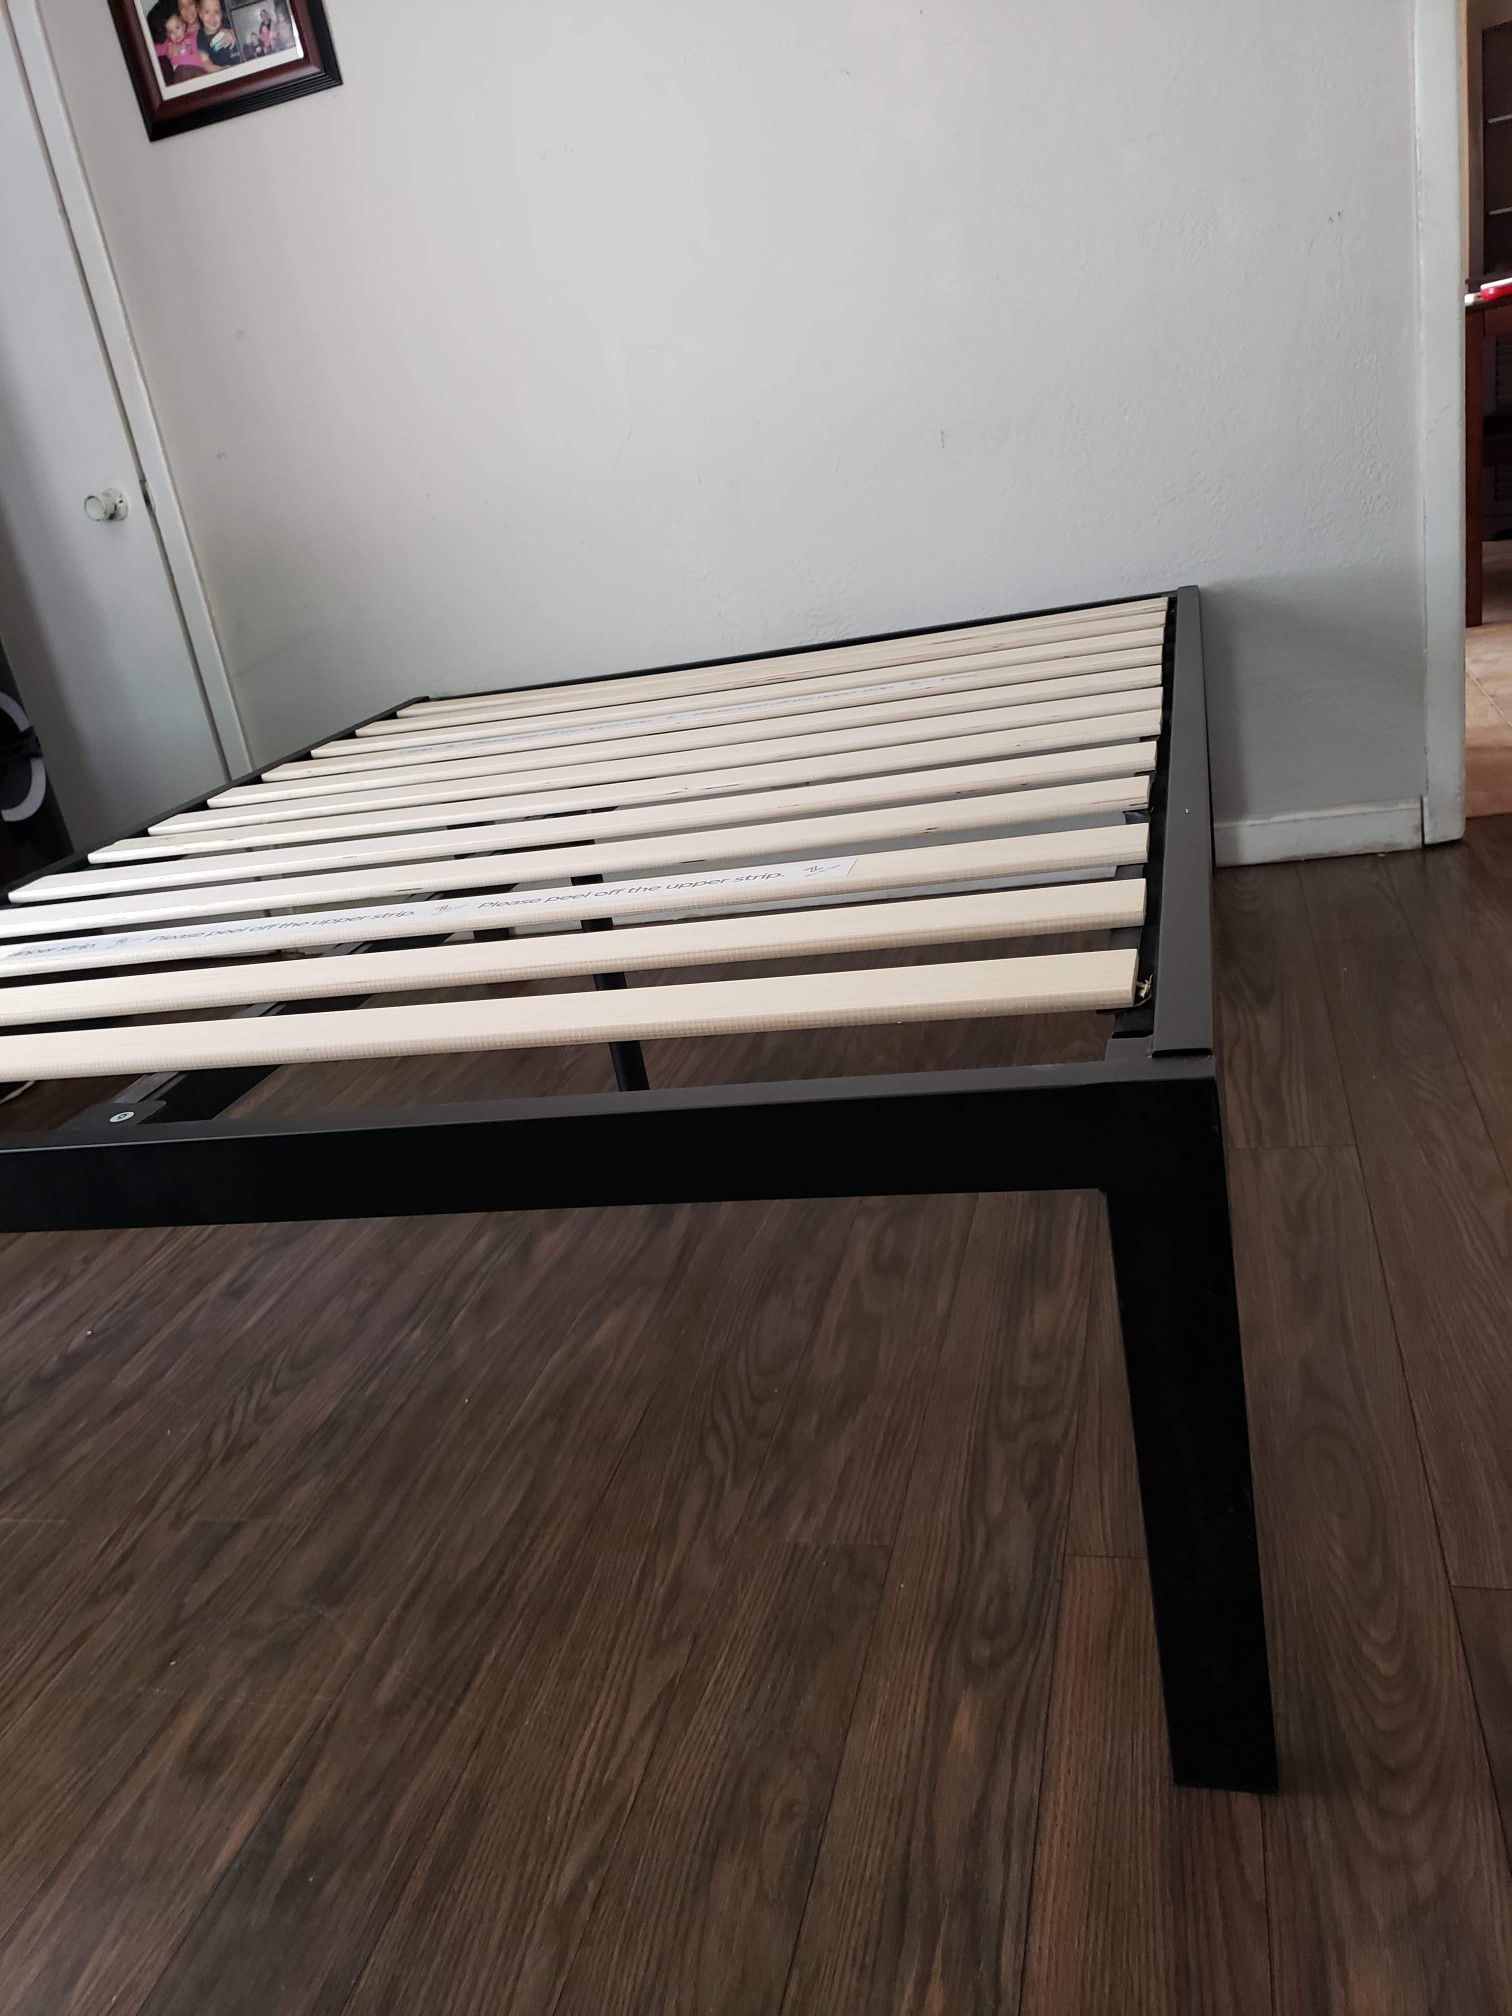 Platform bed frame Queen size. $75 new. Free delivery in Modesto